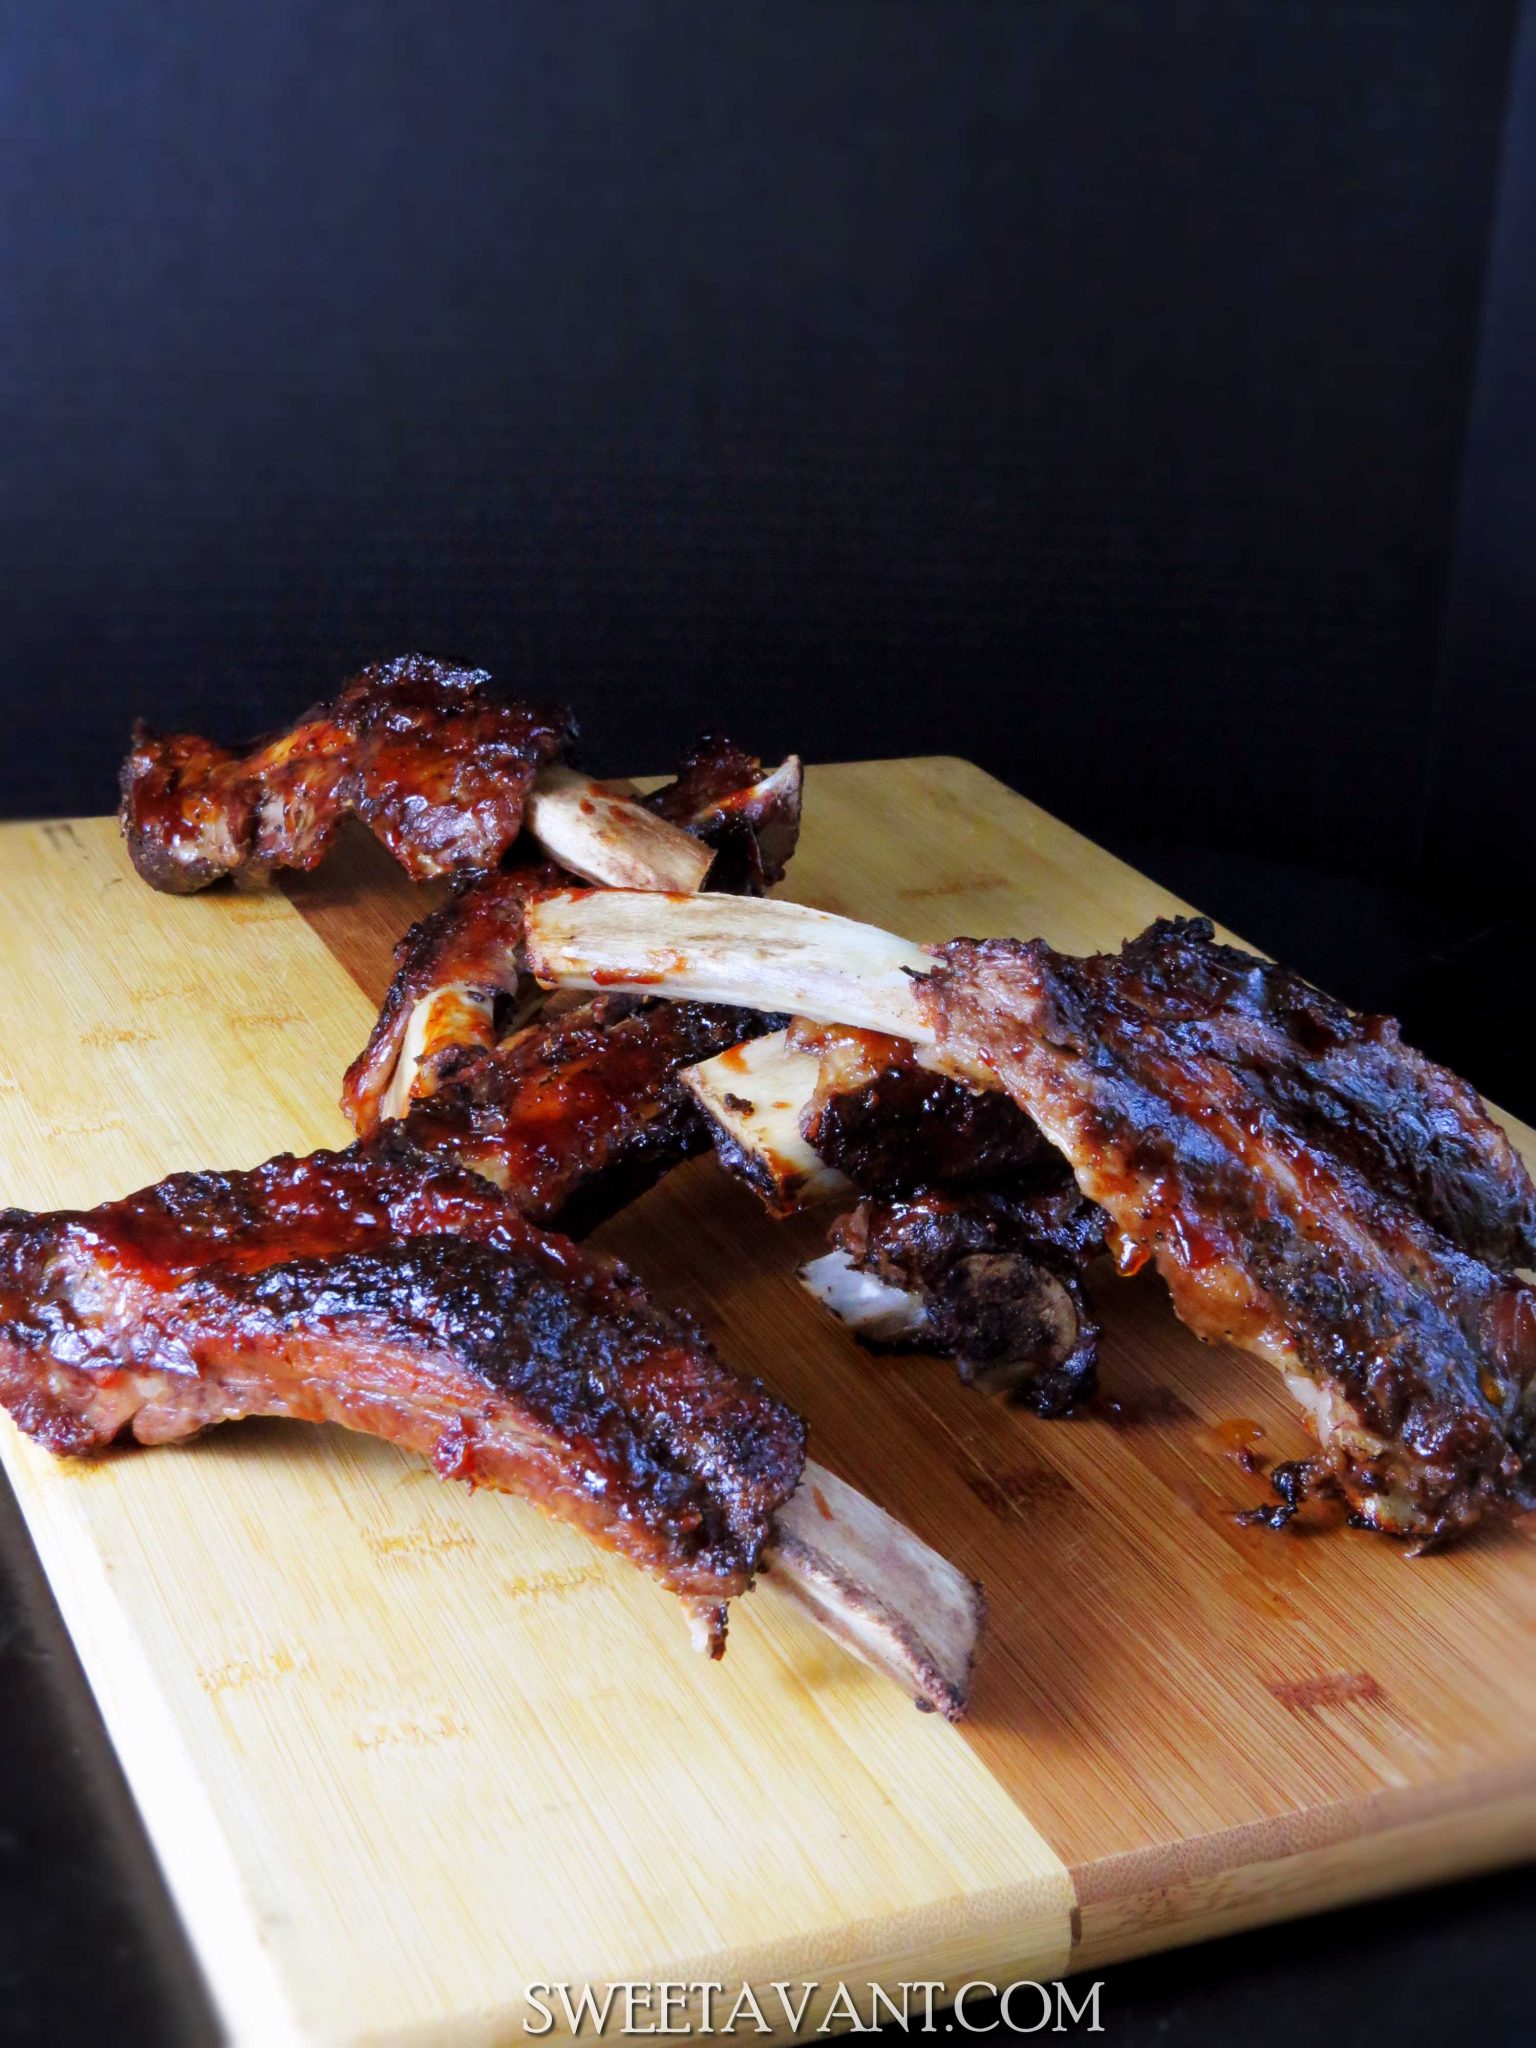 slow cooked oven barbecued beef ribs sweetsavant.com Americas best food blog